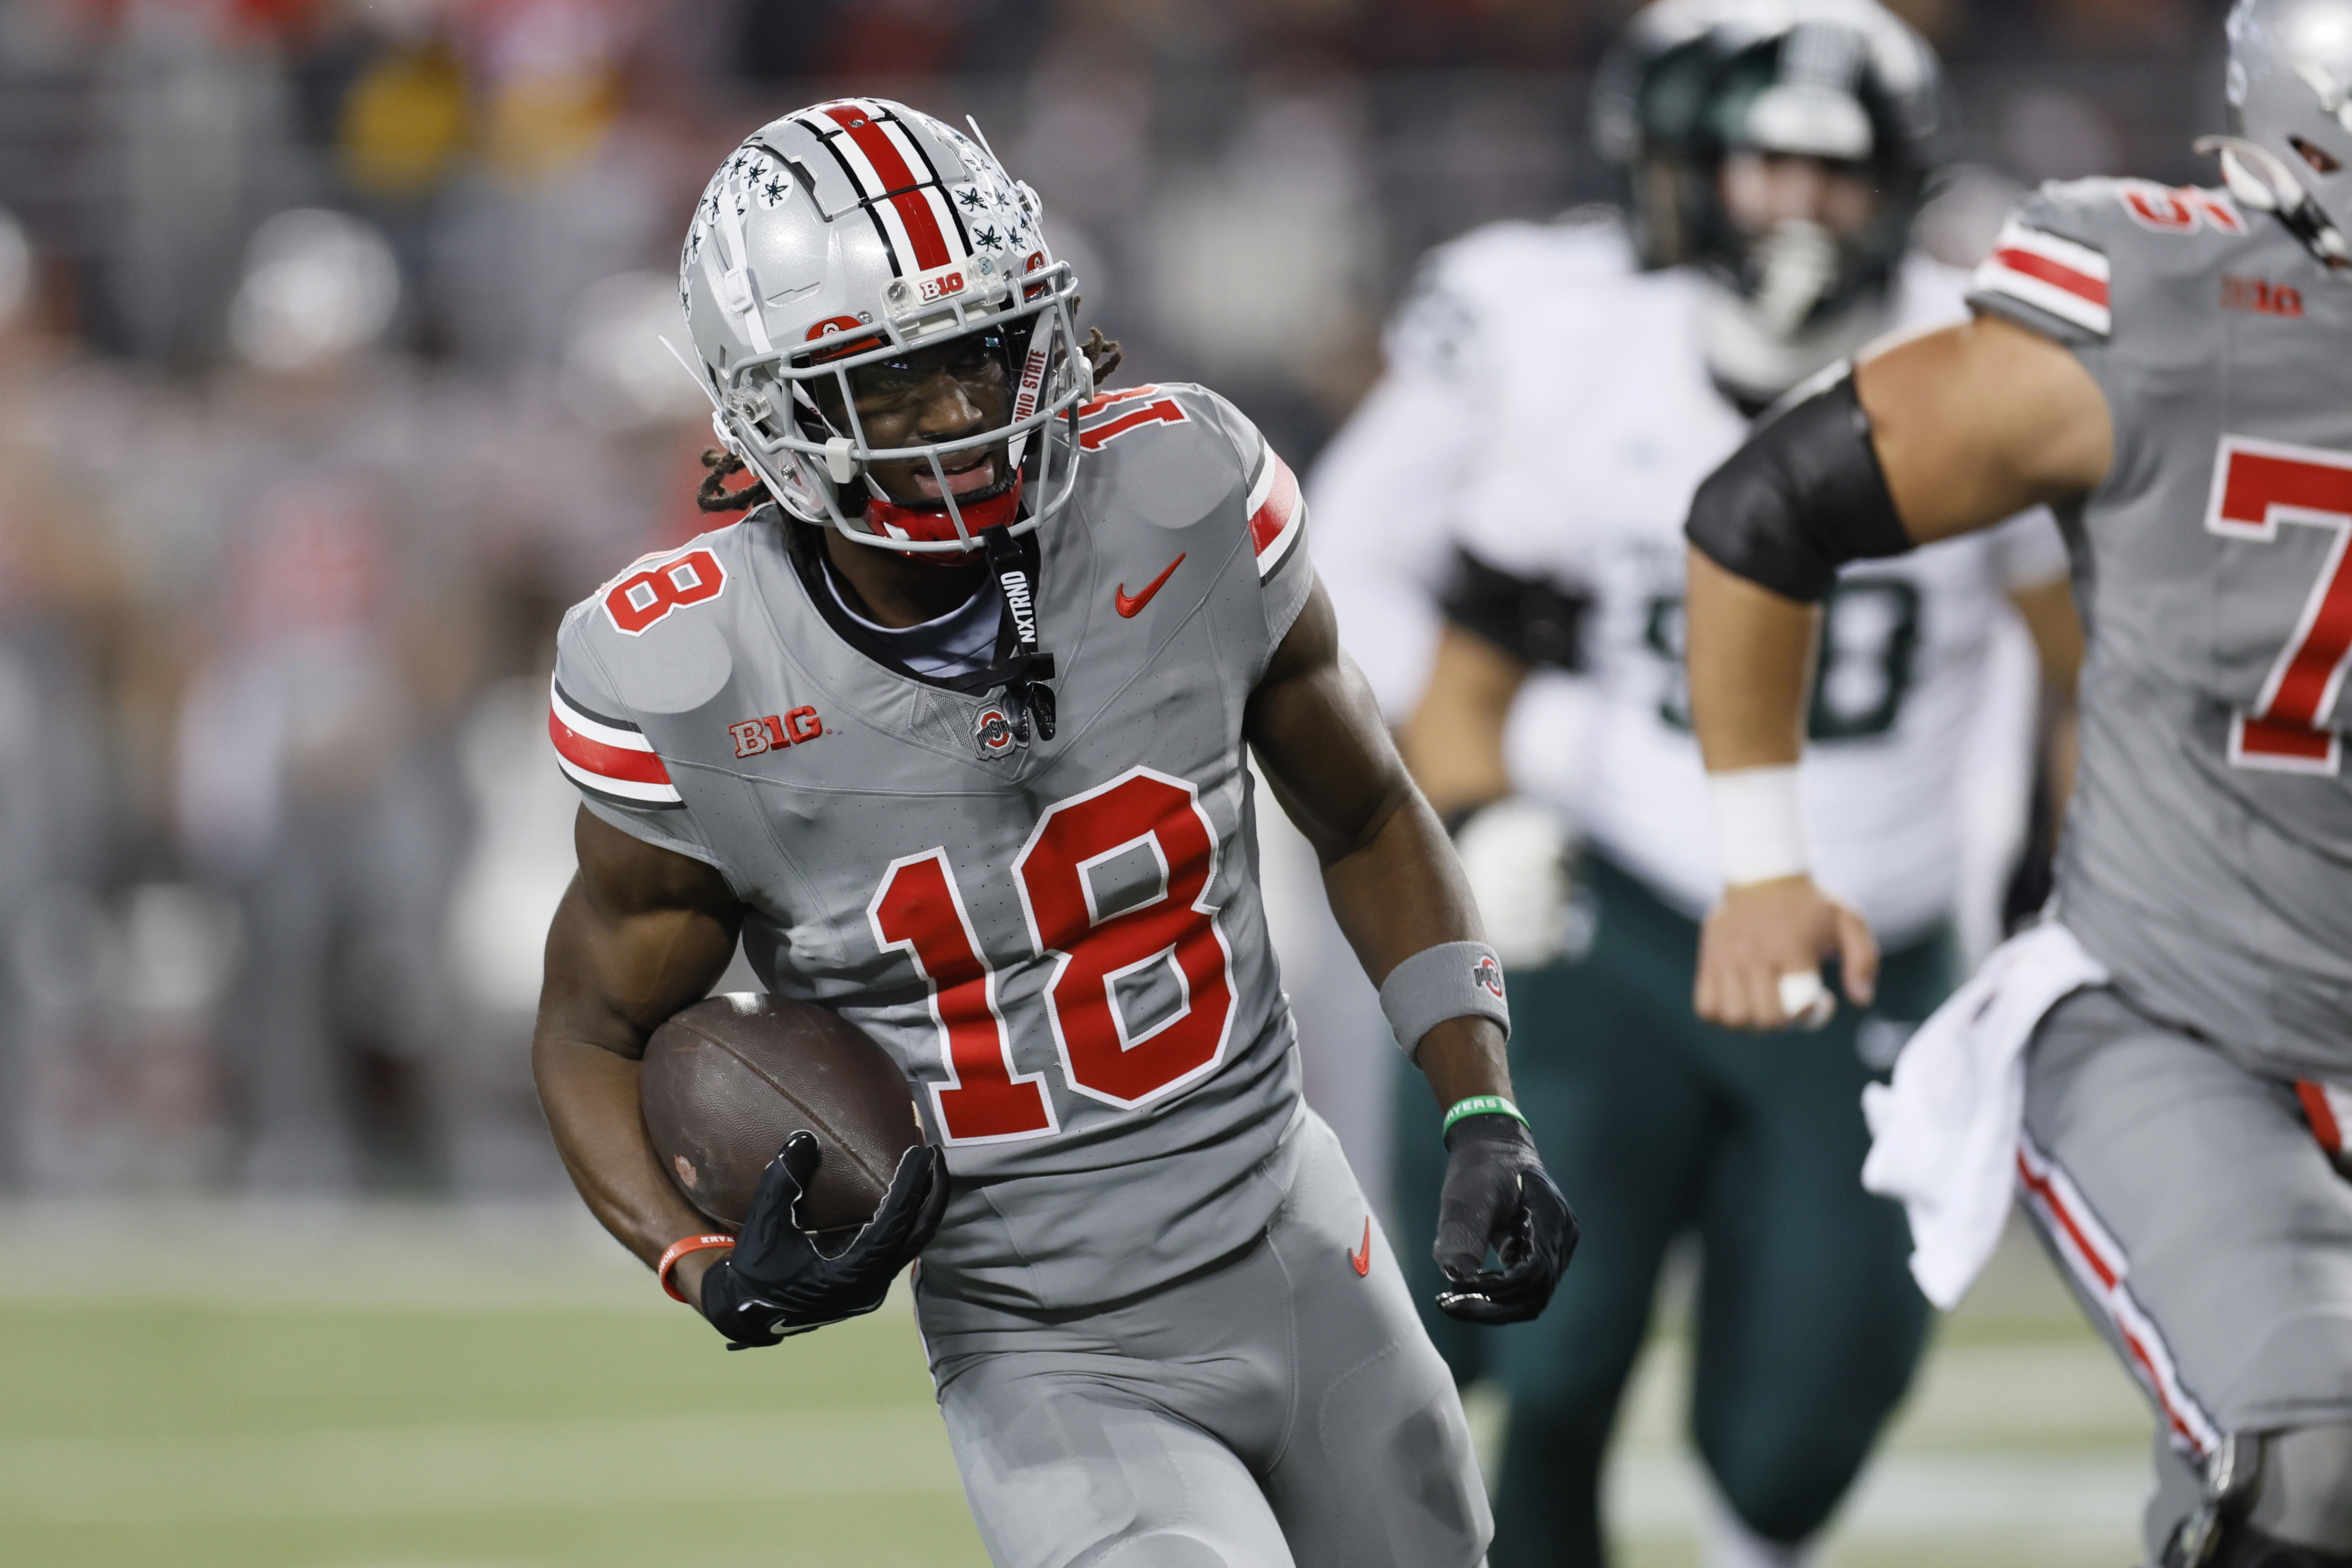 Ohio State receivers are still learning how to play with Justin